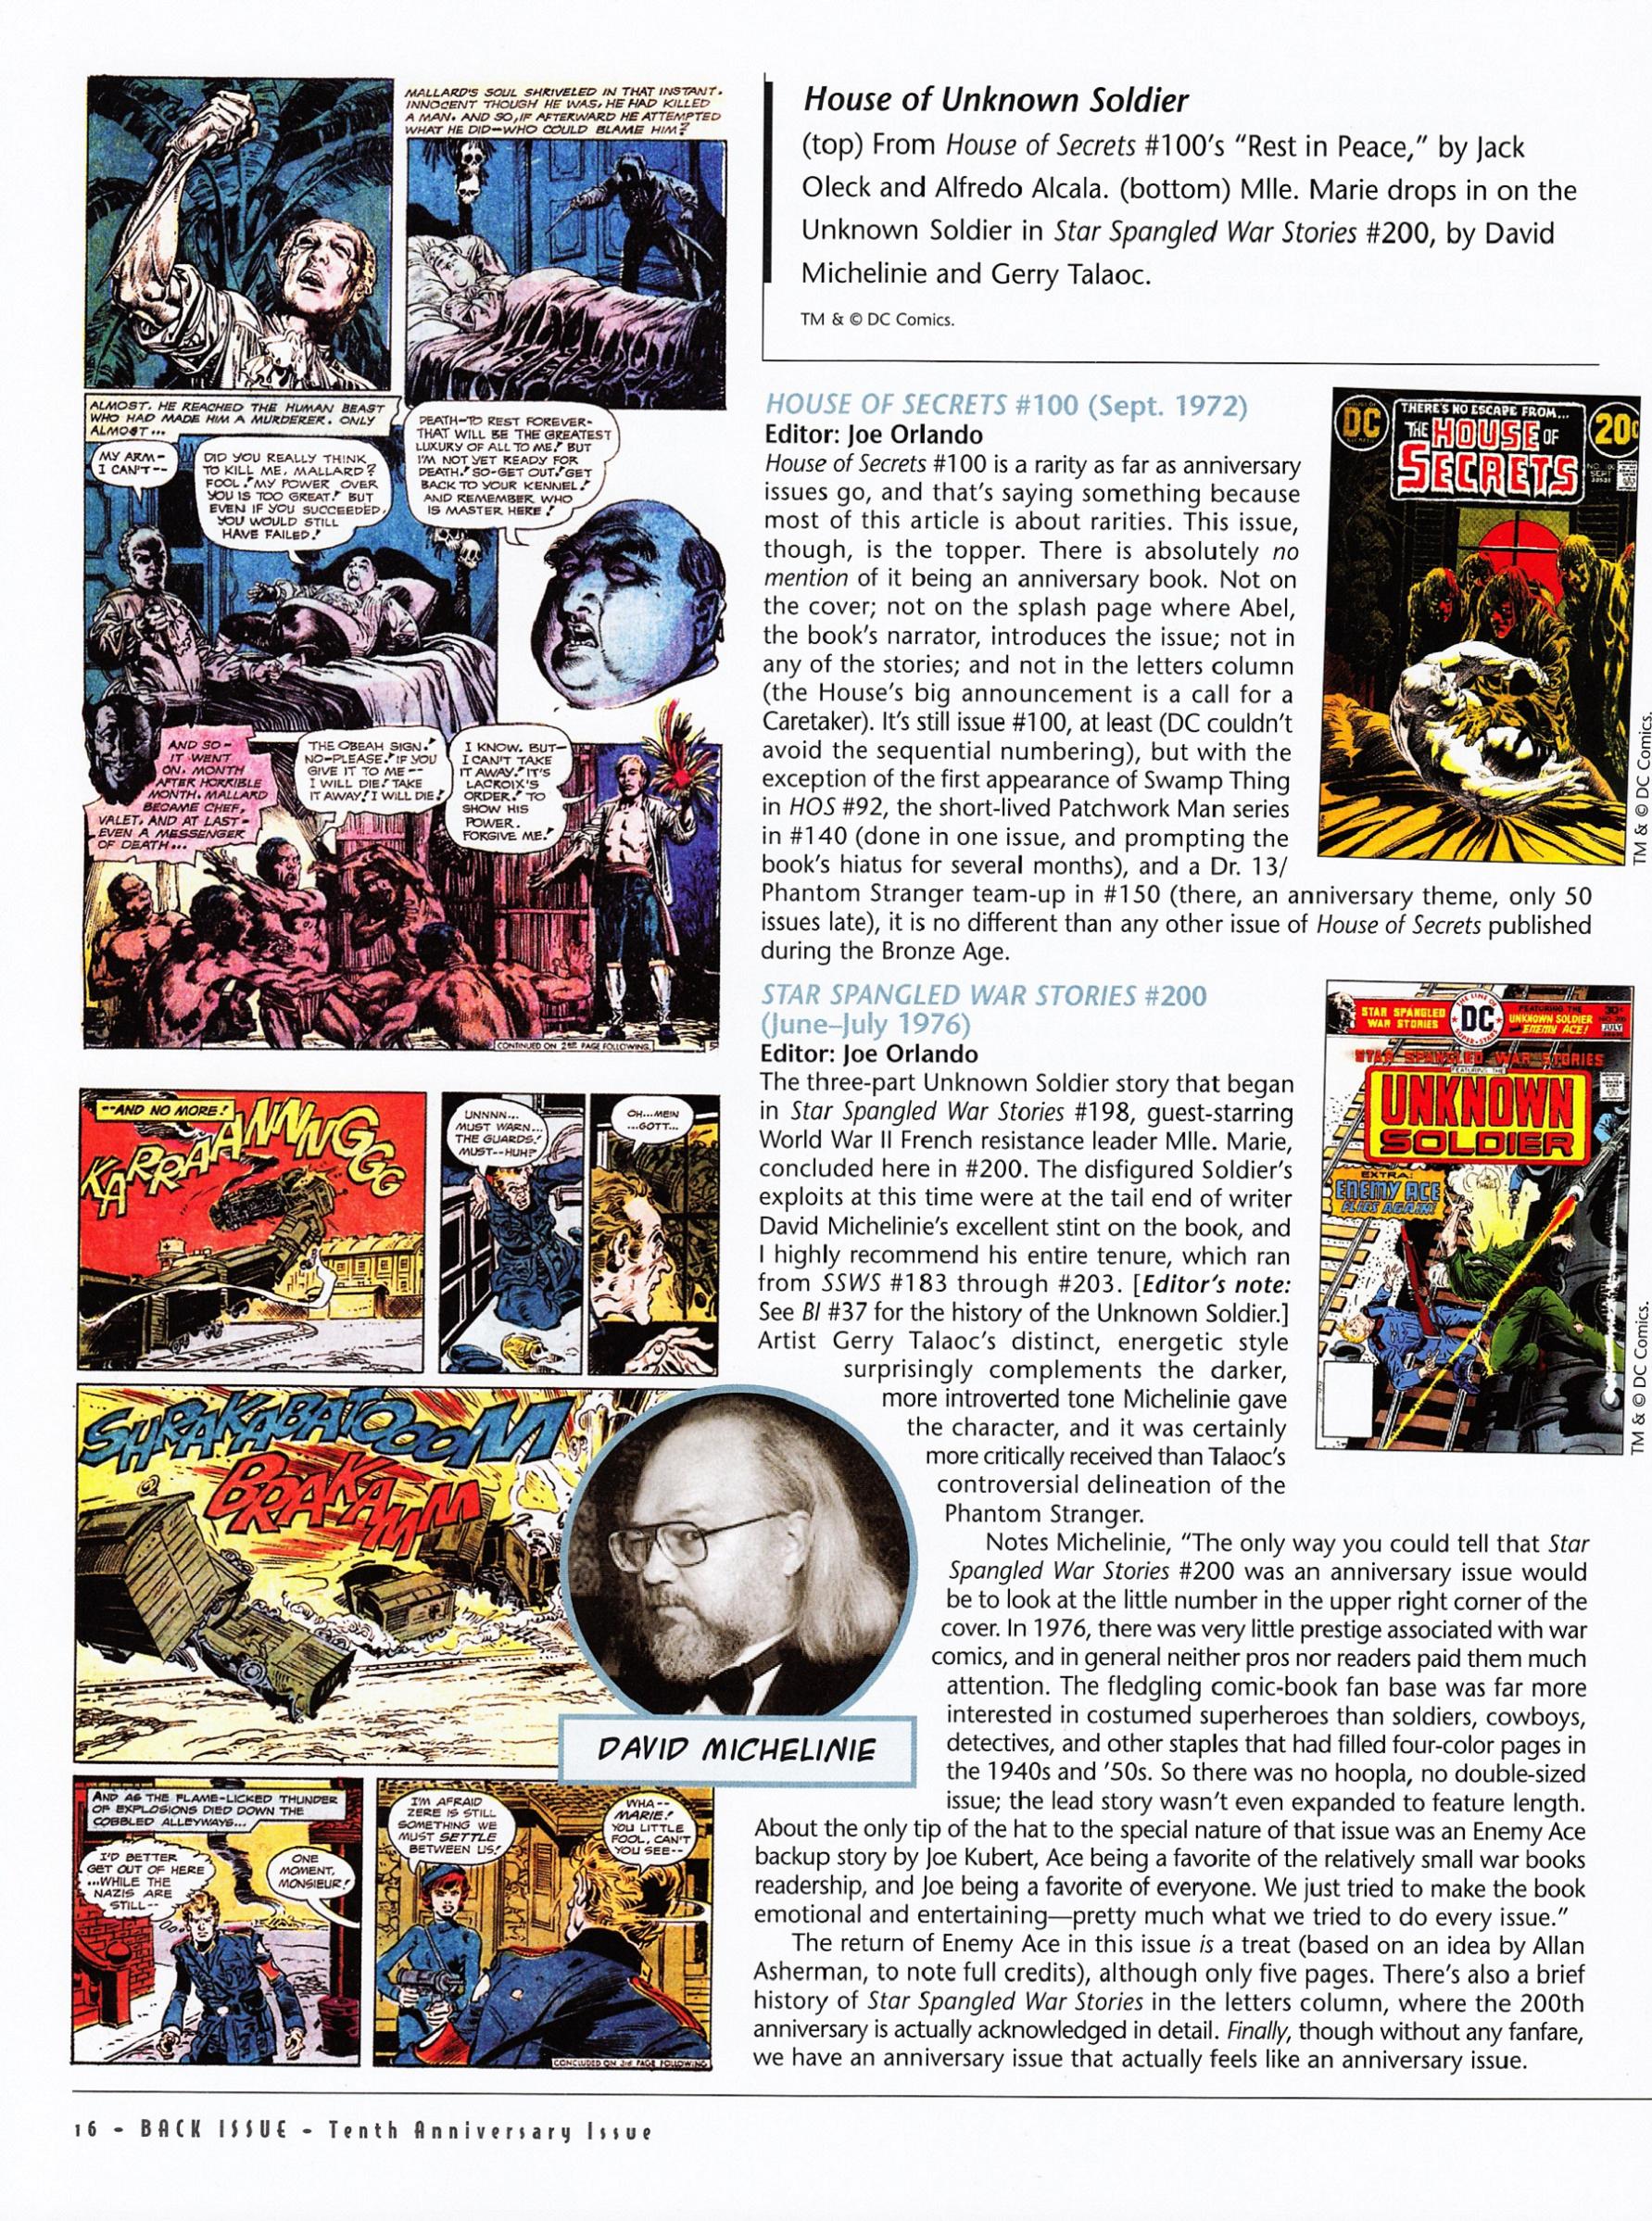 Read online Back Issue comic -  Issue #69 - 17